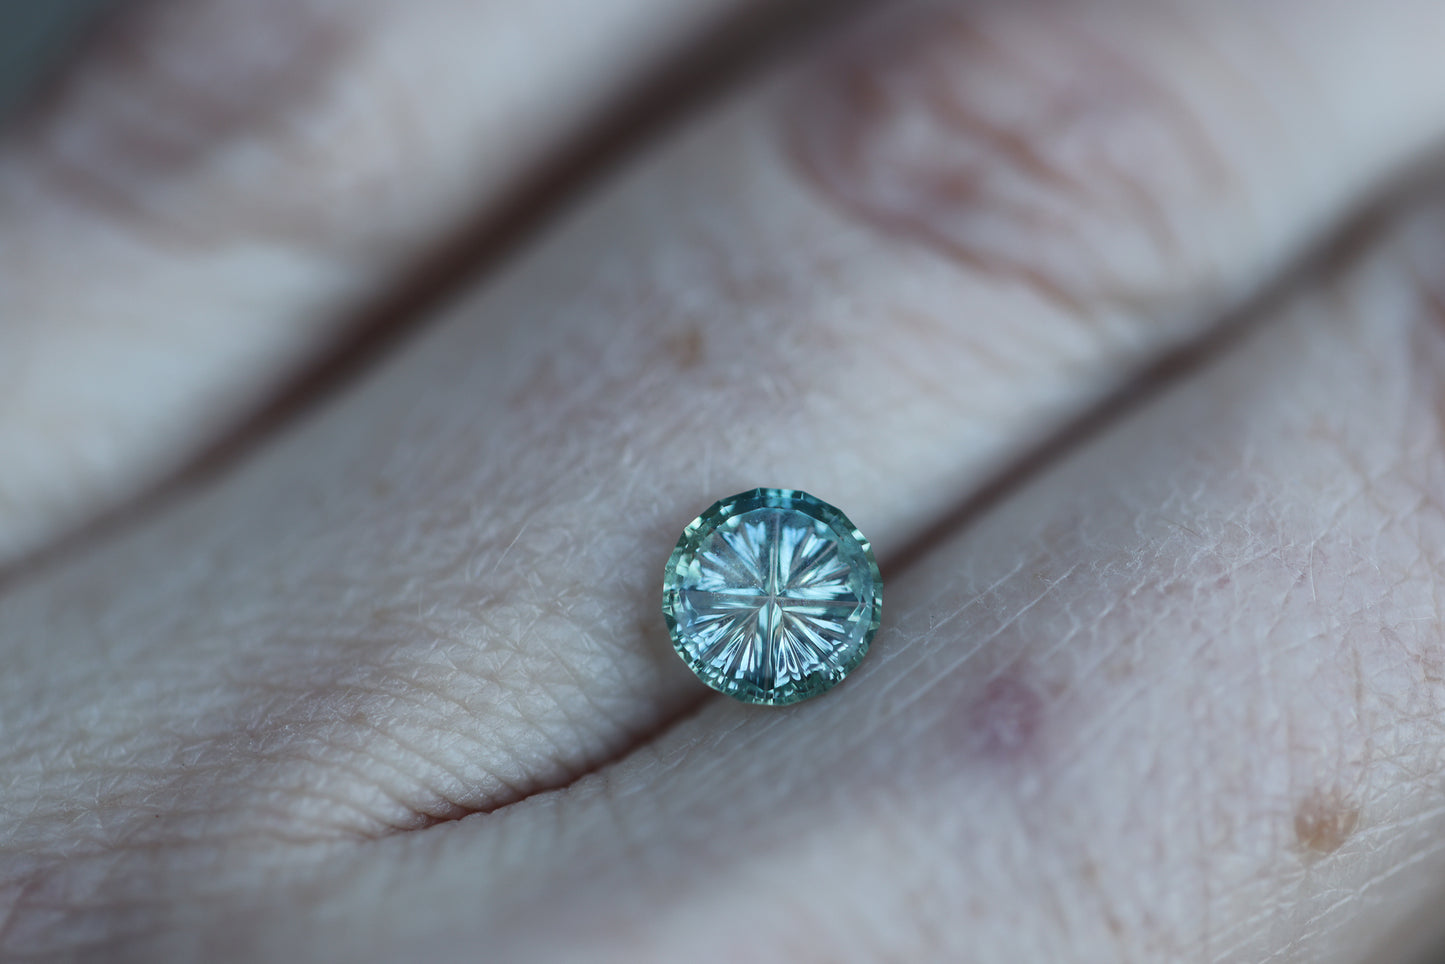 1.05ct round blue teal sapphire - Starbrite cut by John Dyer